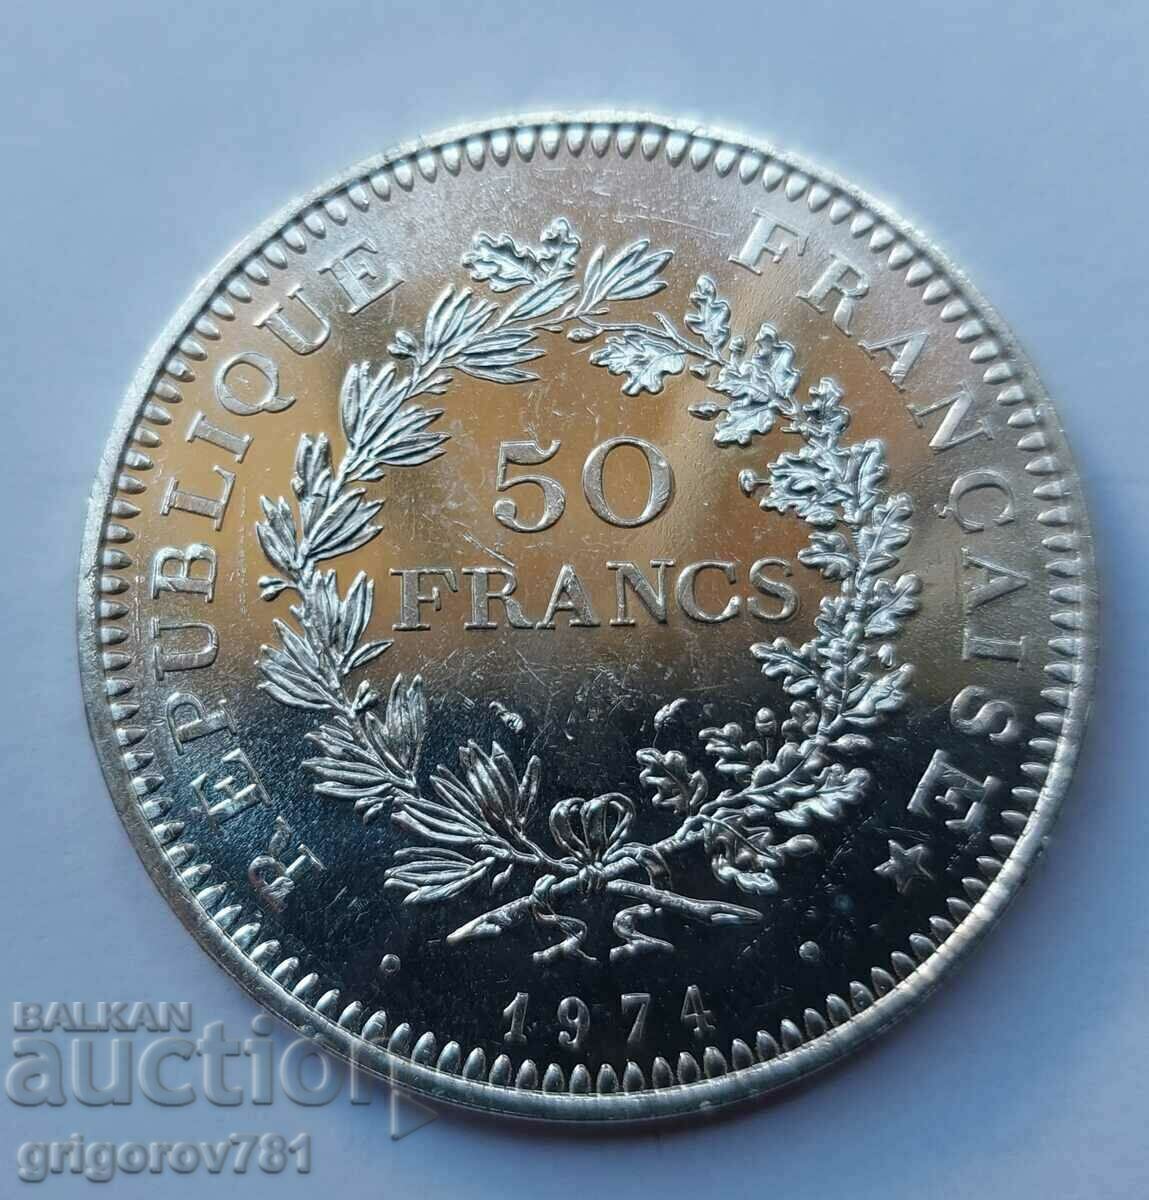 50 Francs Silver France 1974 - Silver Coin #18